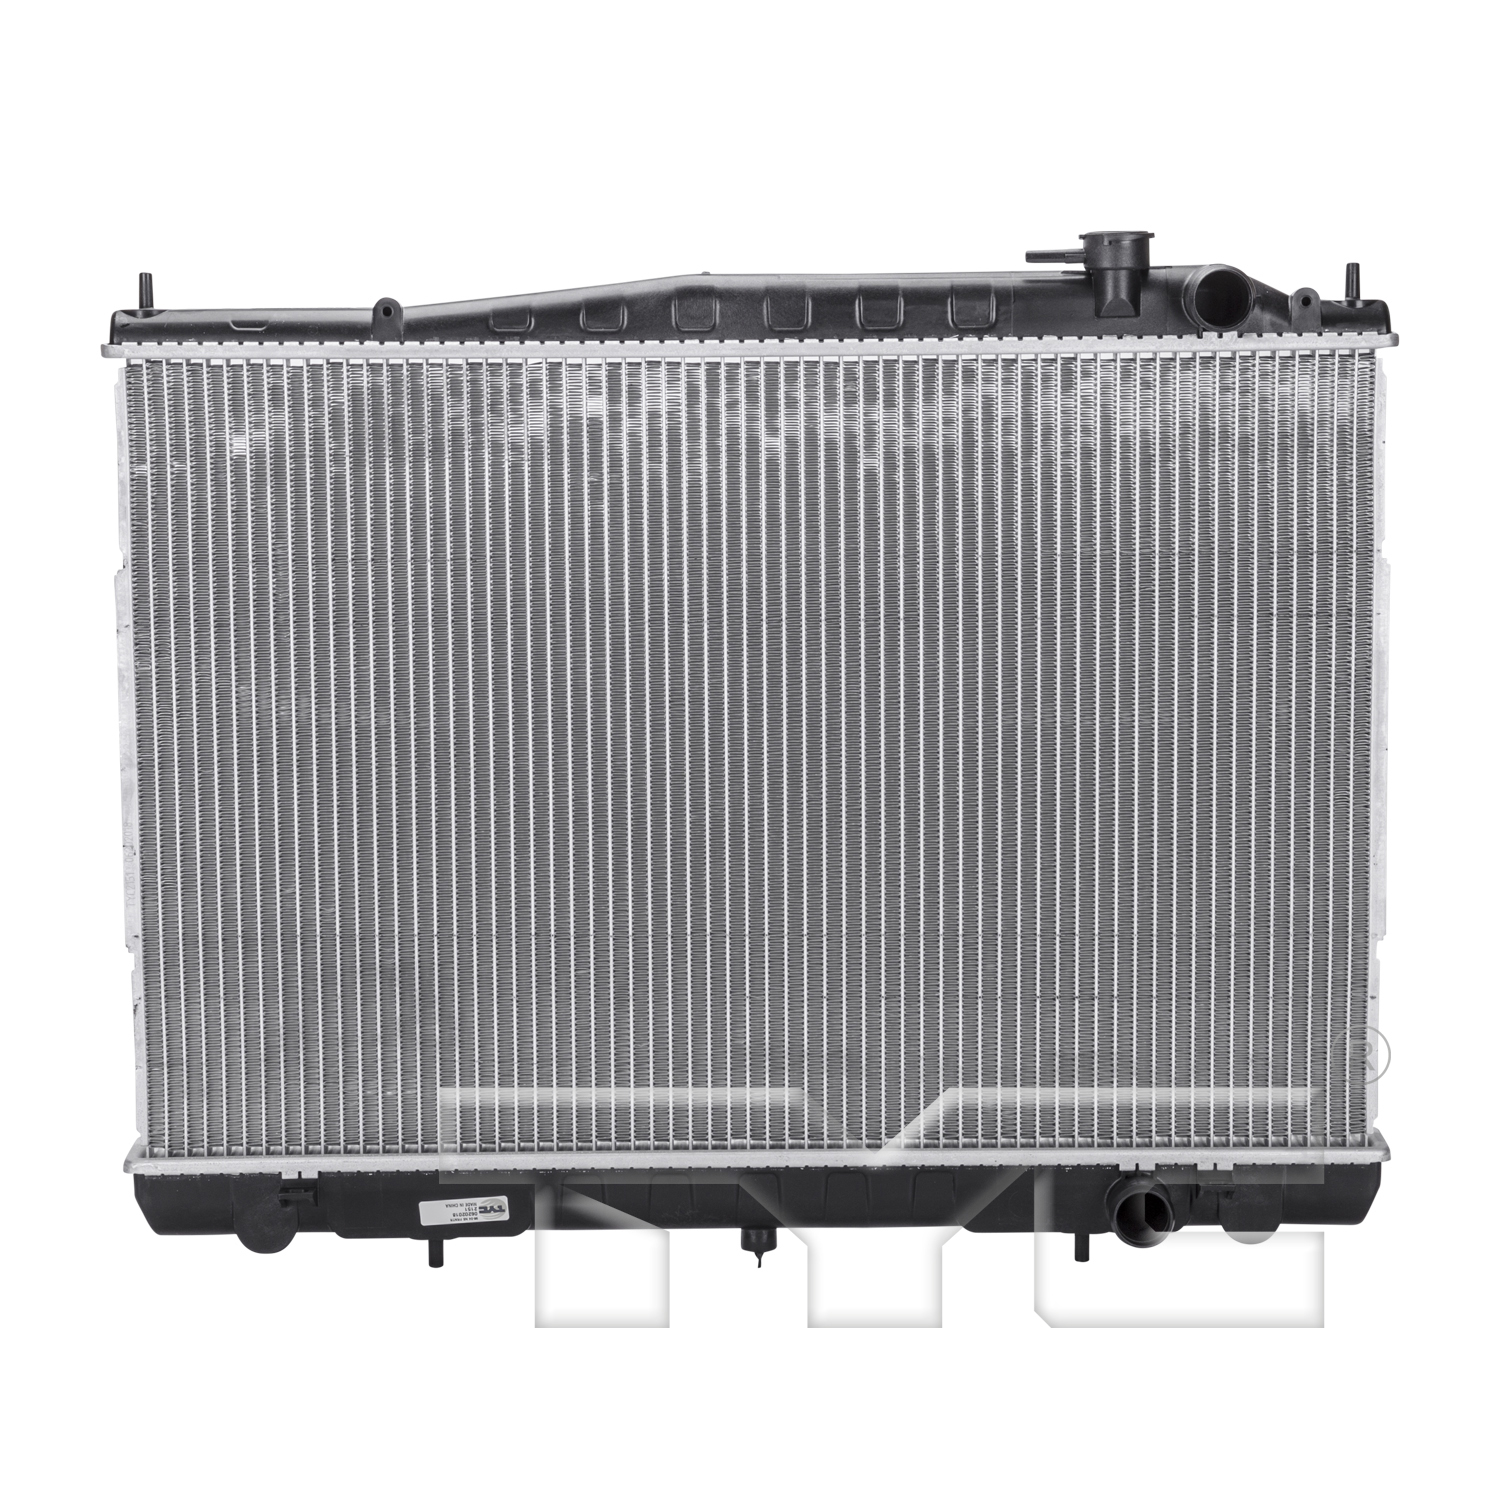 Aftermarket RADIATORS for NISSAN - FRONTIER, FRONTIER,98-00,Radiator assembly